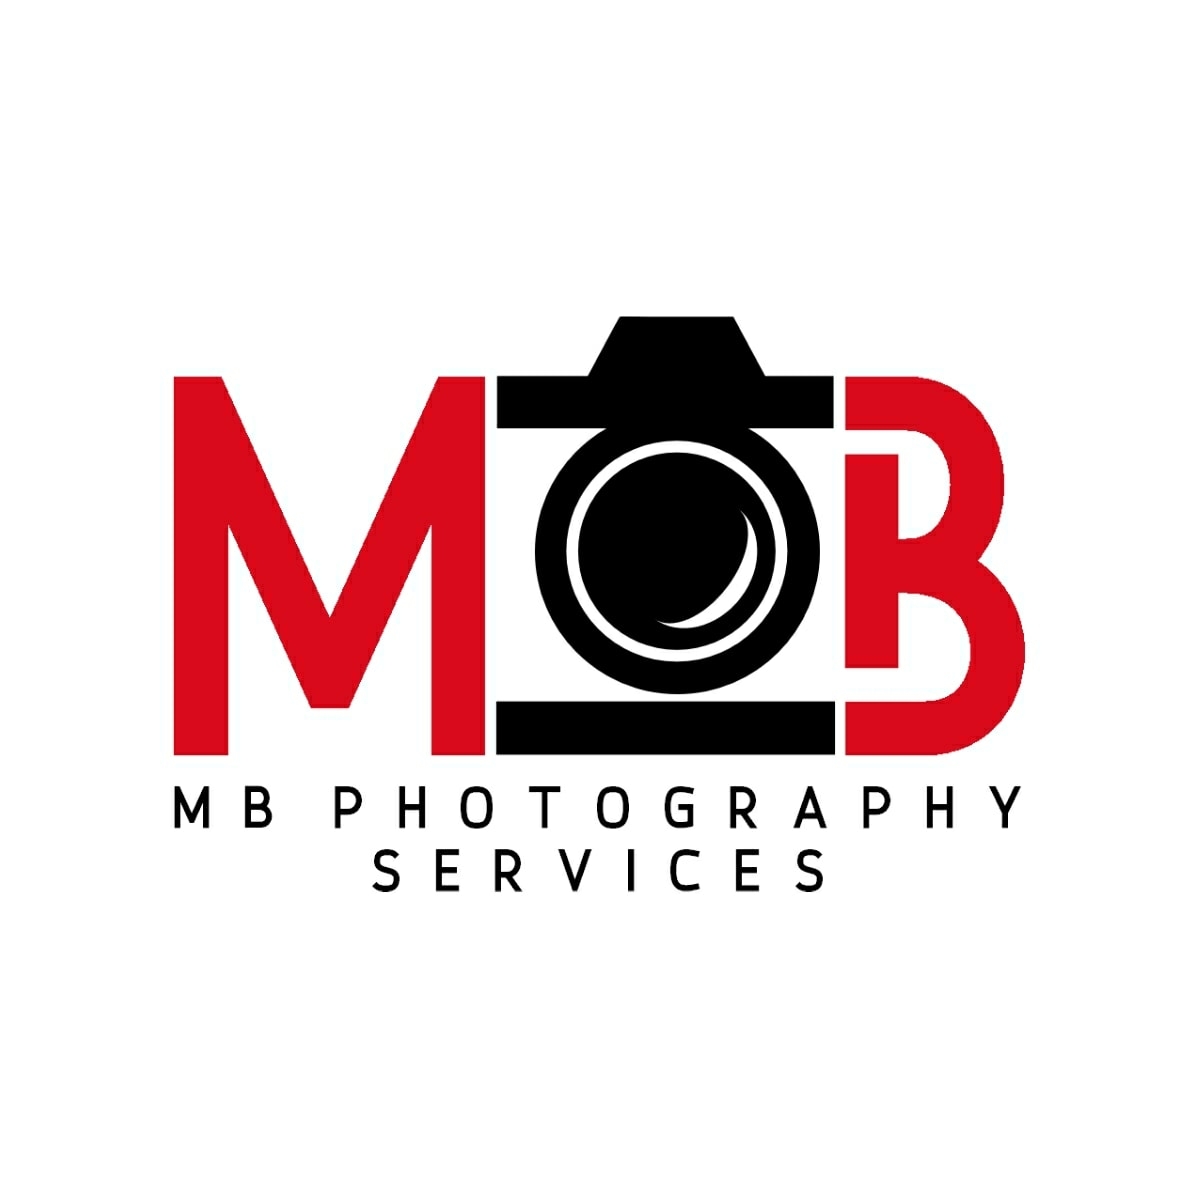 MB Photography Services